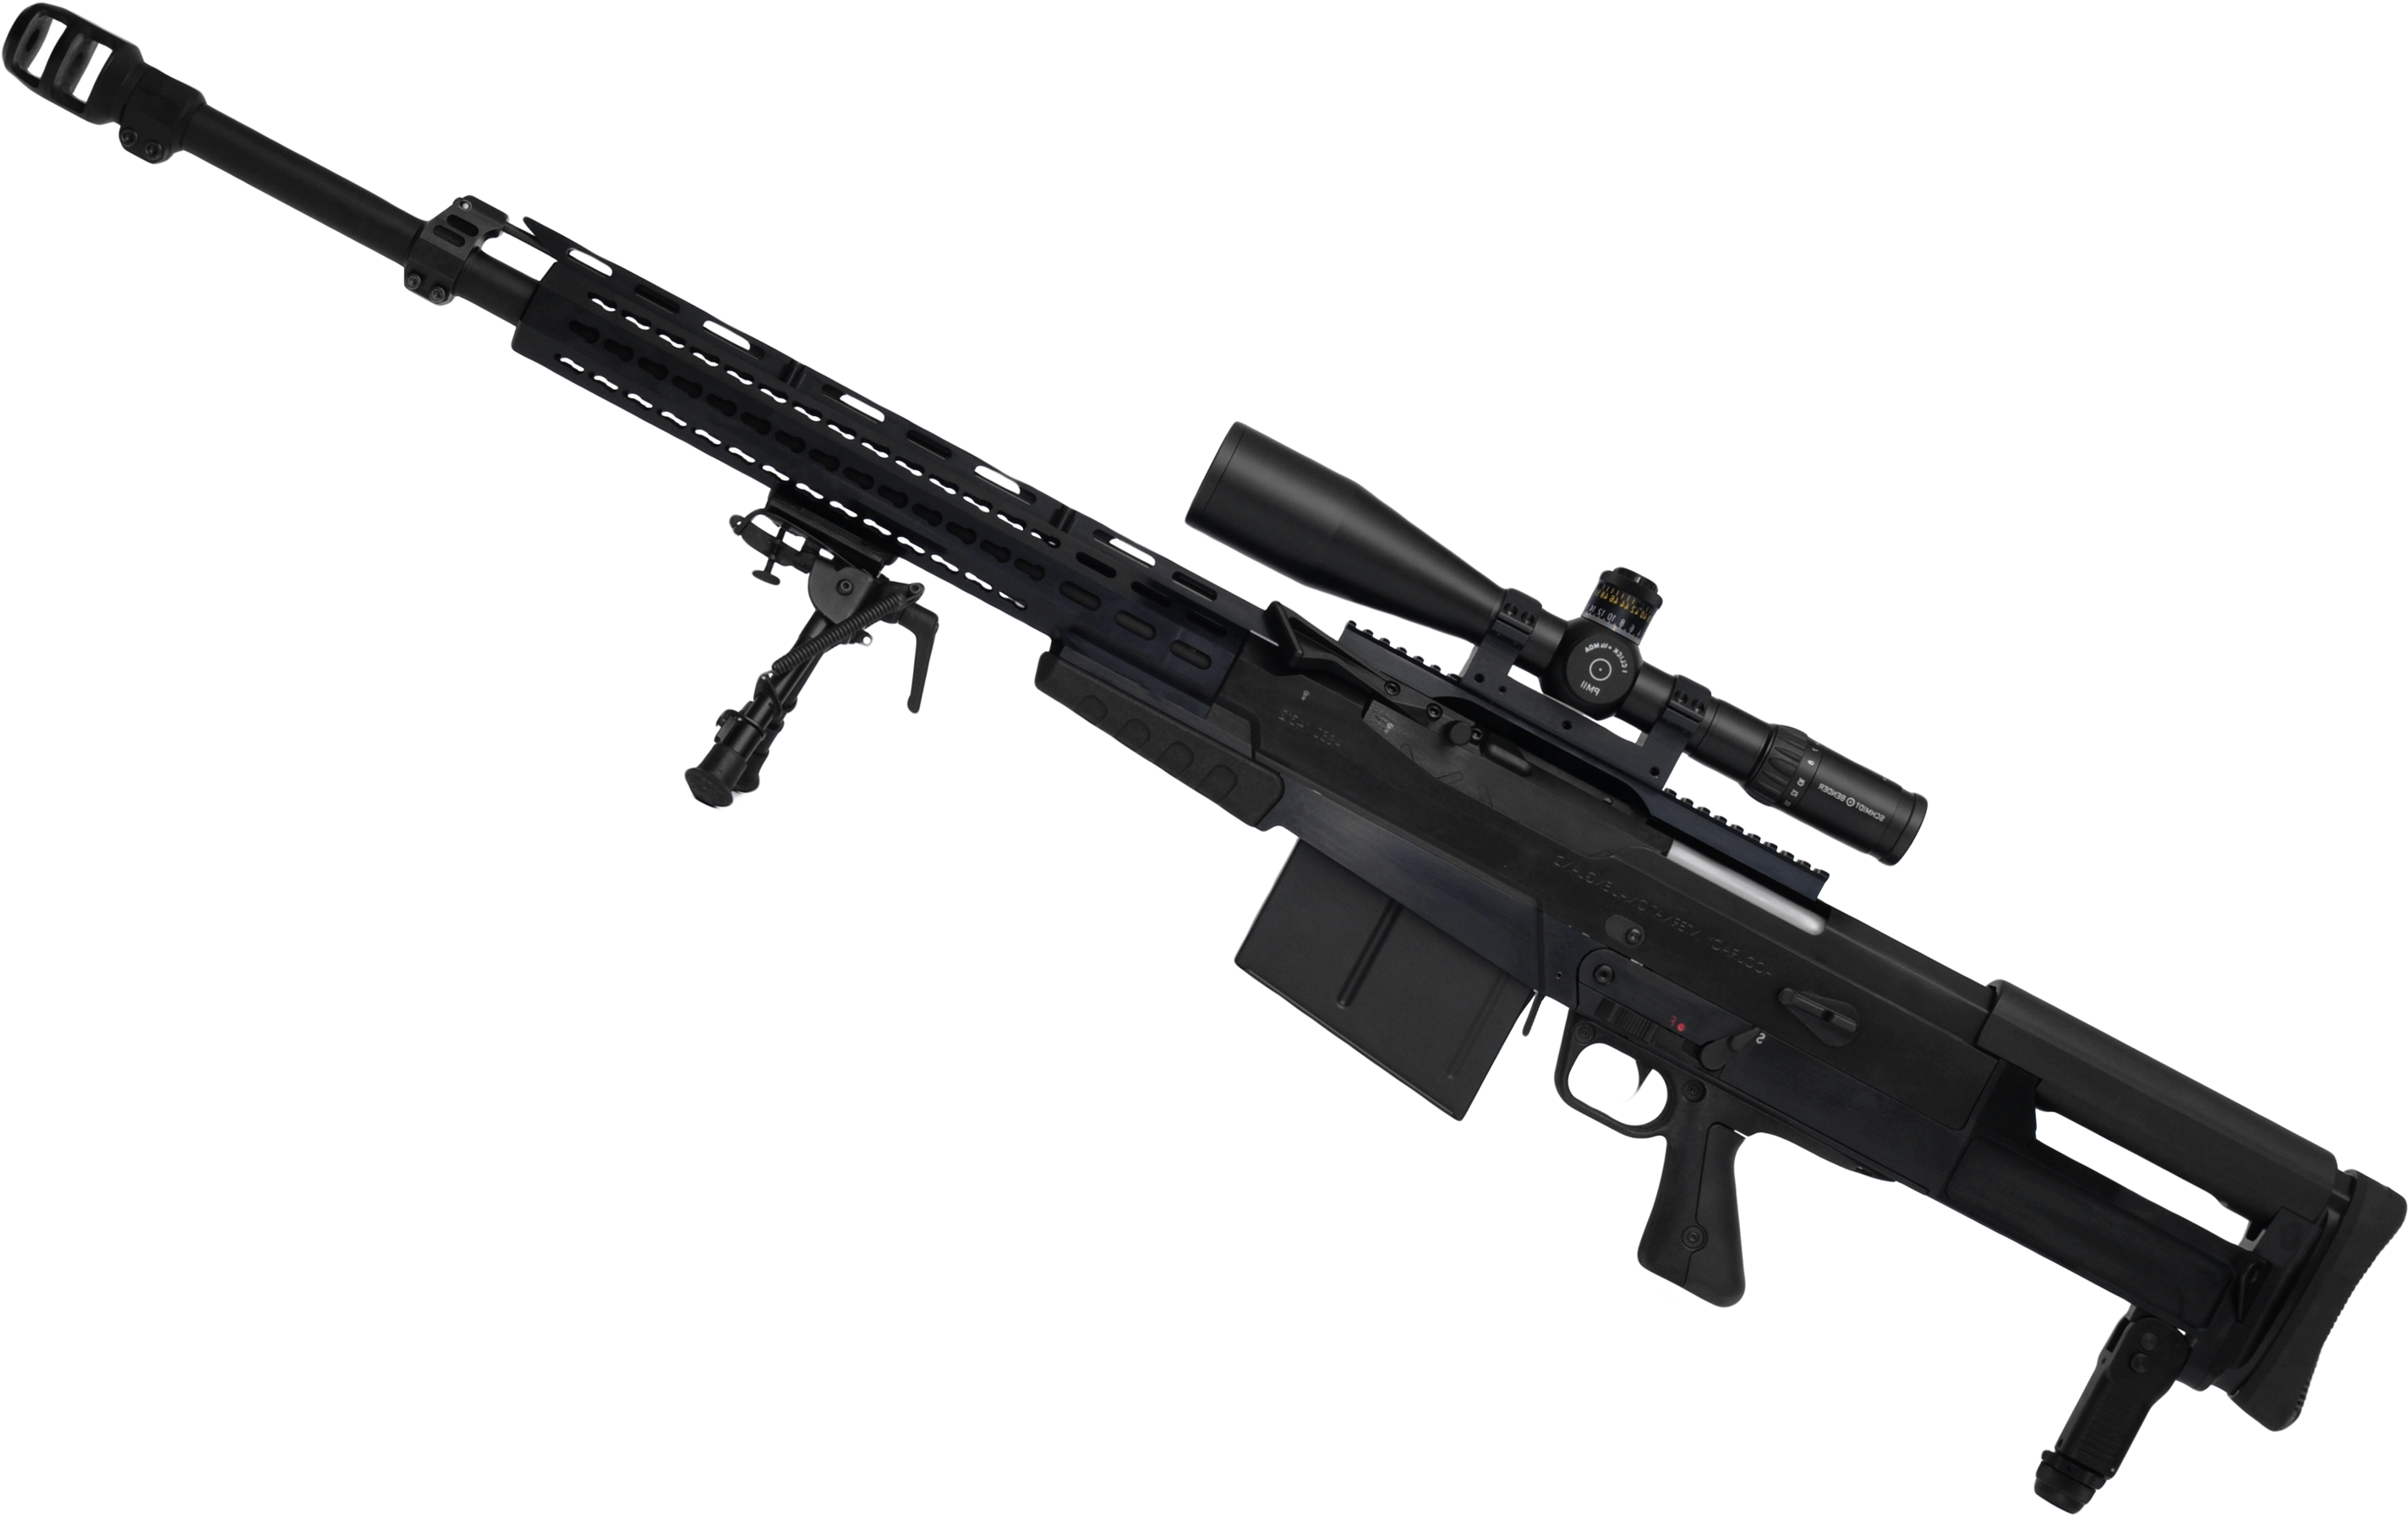 A Black Rifle With A Scope